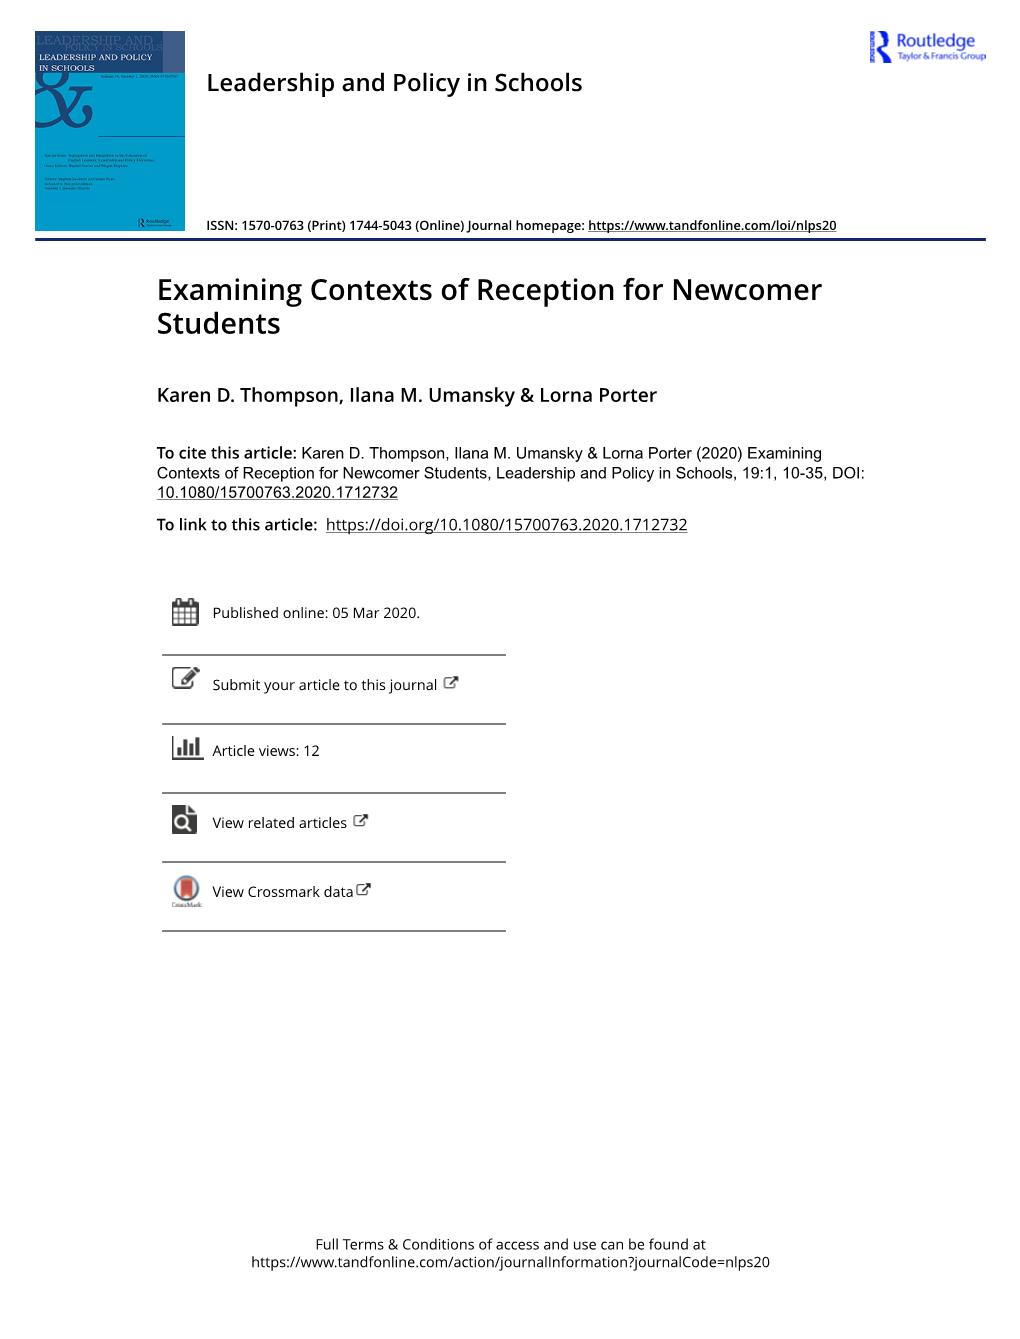 Examining Contexts of Reception for Newcomer Students